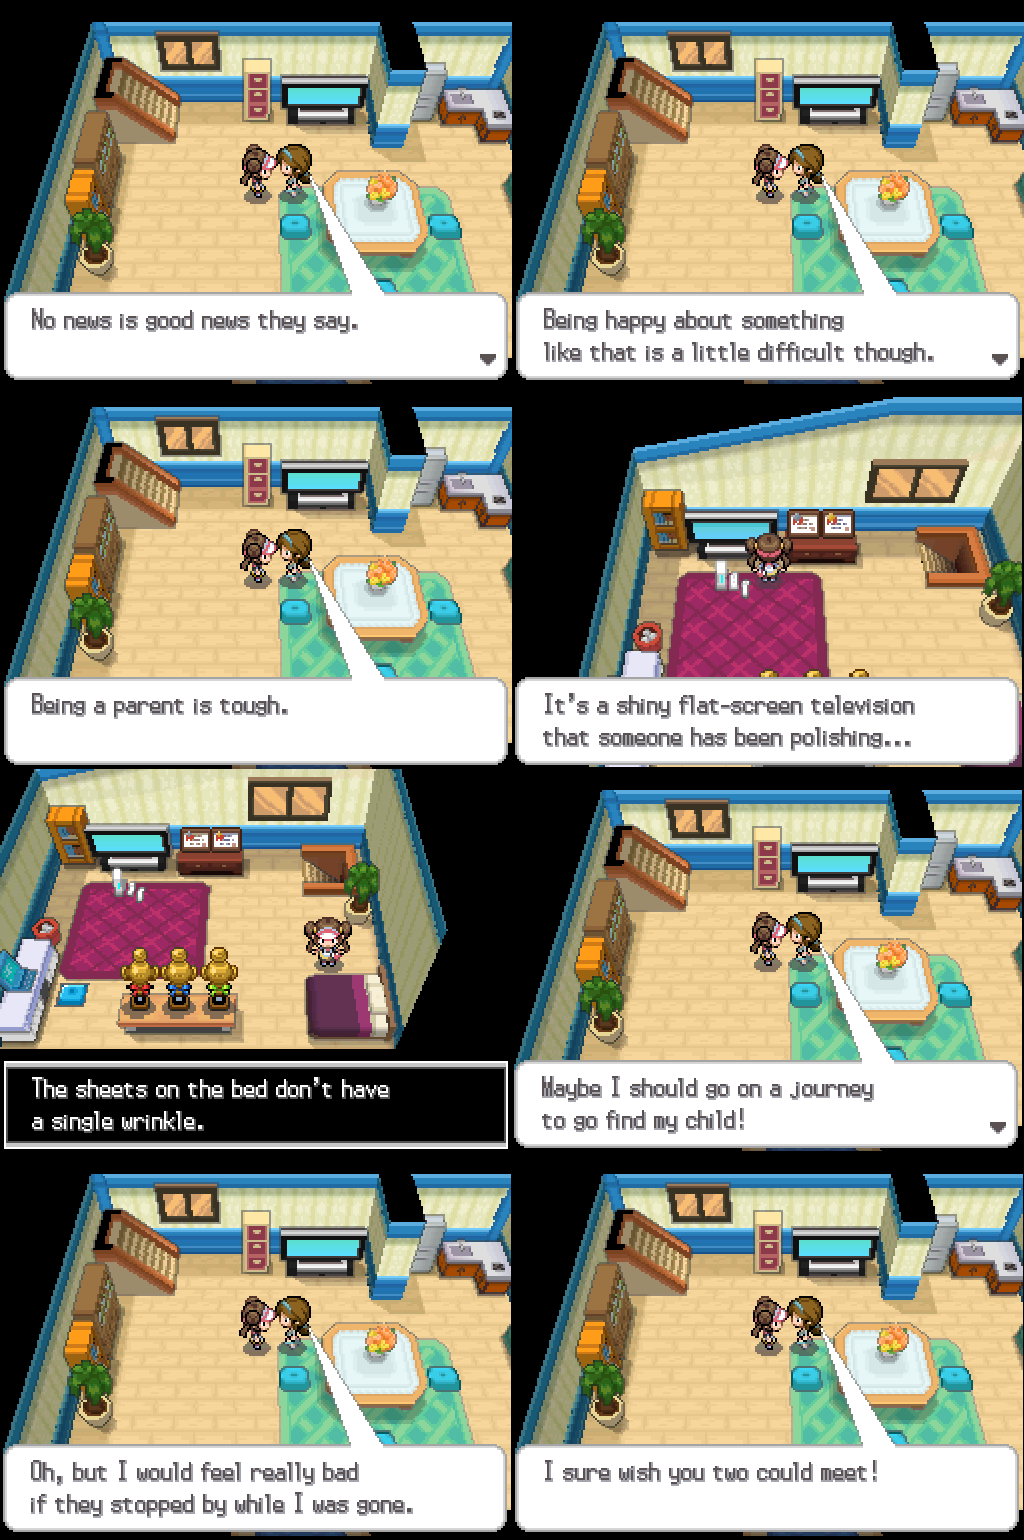 In Pokemon Black and White 2, the protagonist